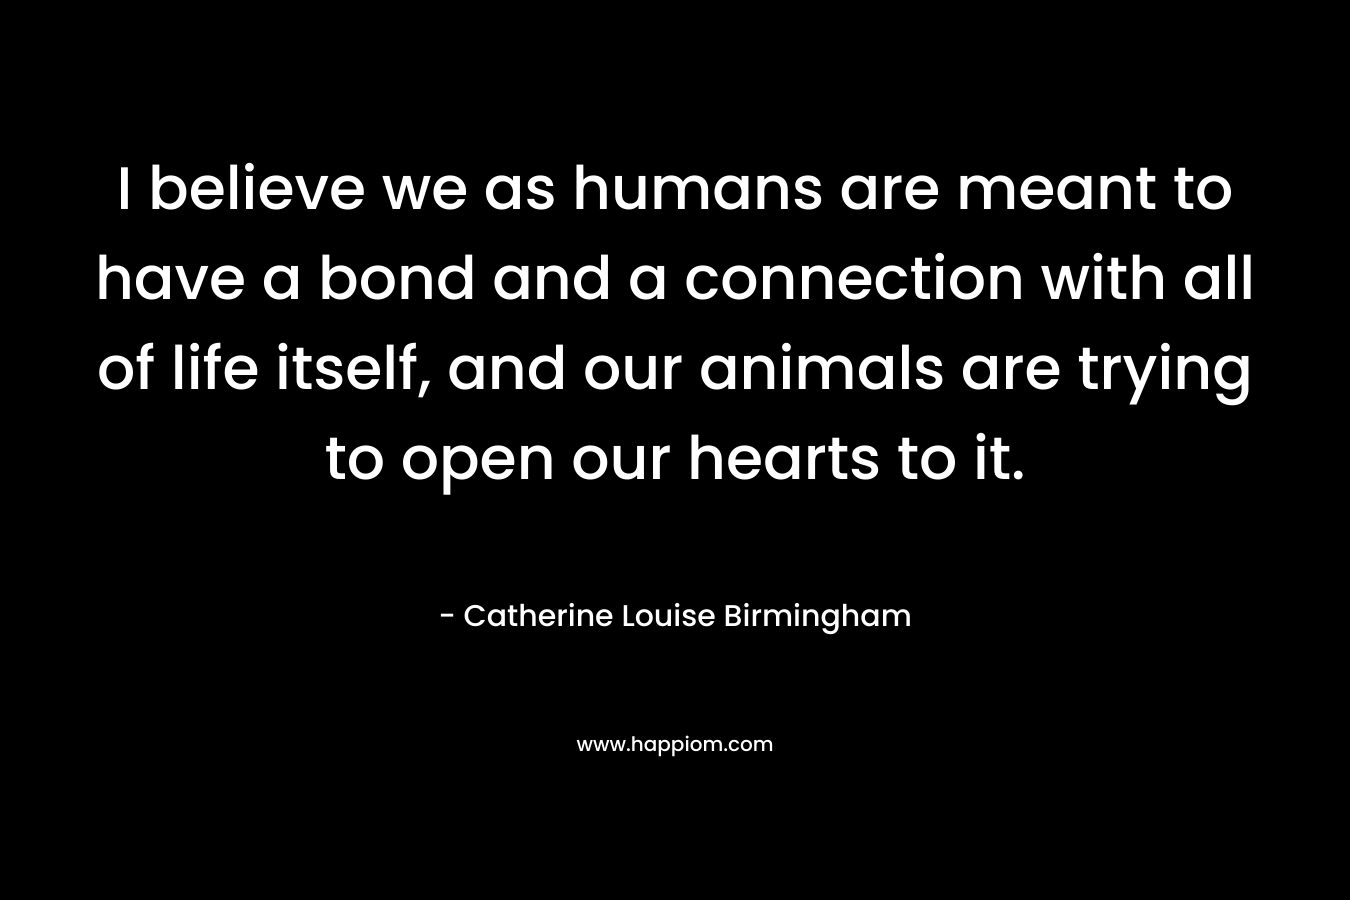 I believe we as humans are meant to have a bond and a connection with all of life itself, and our animals are trying to open our hearts to it. – Catherine Louise Birmingham